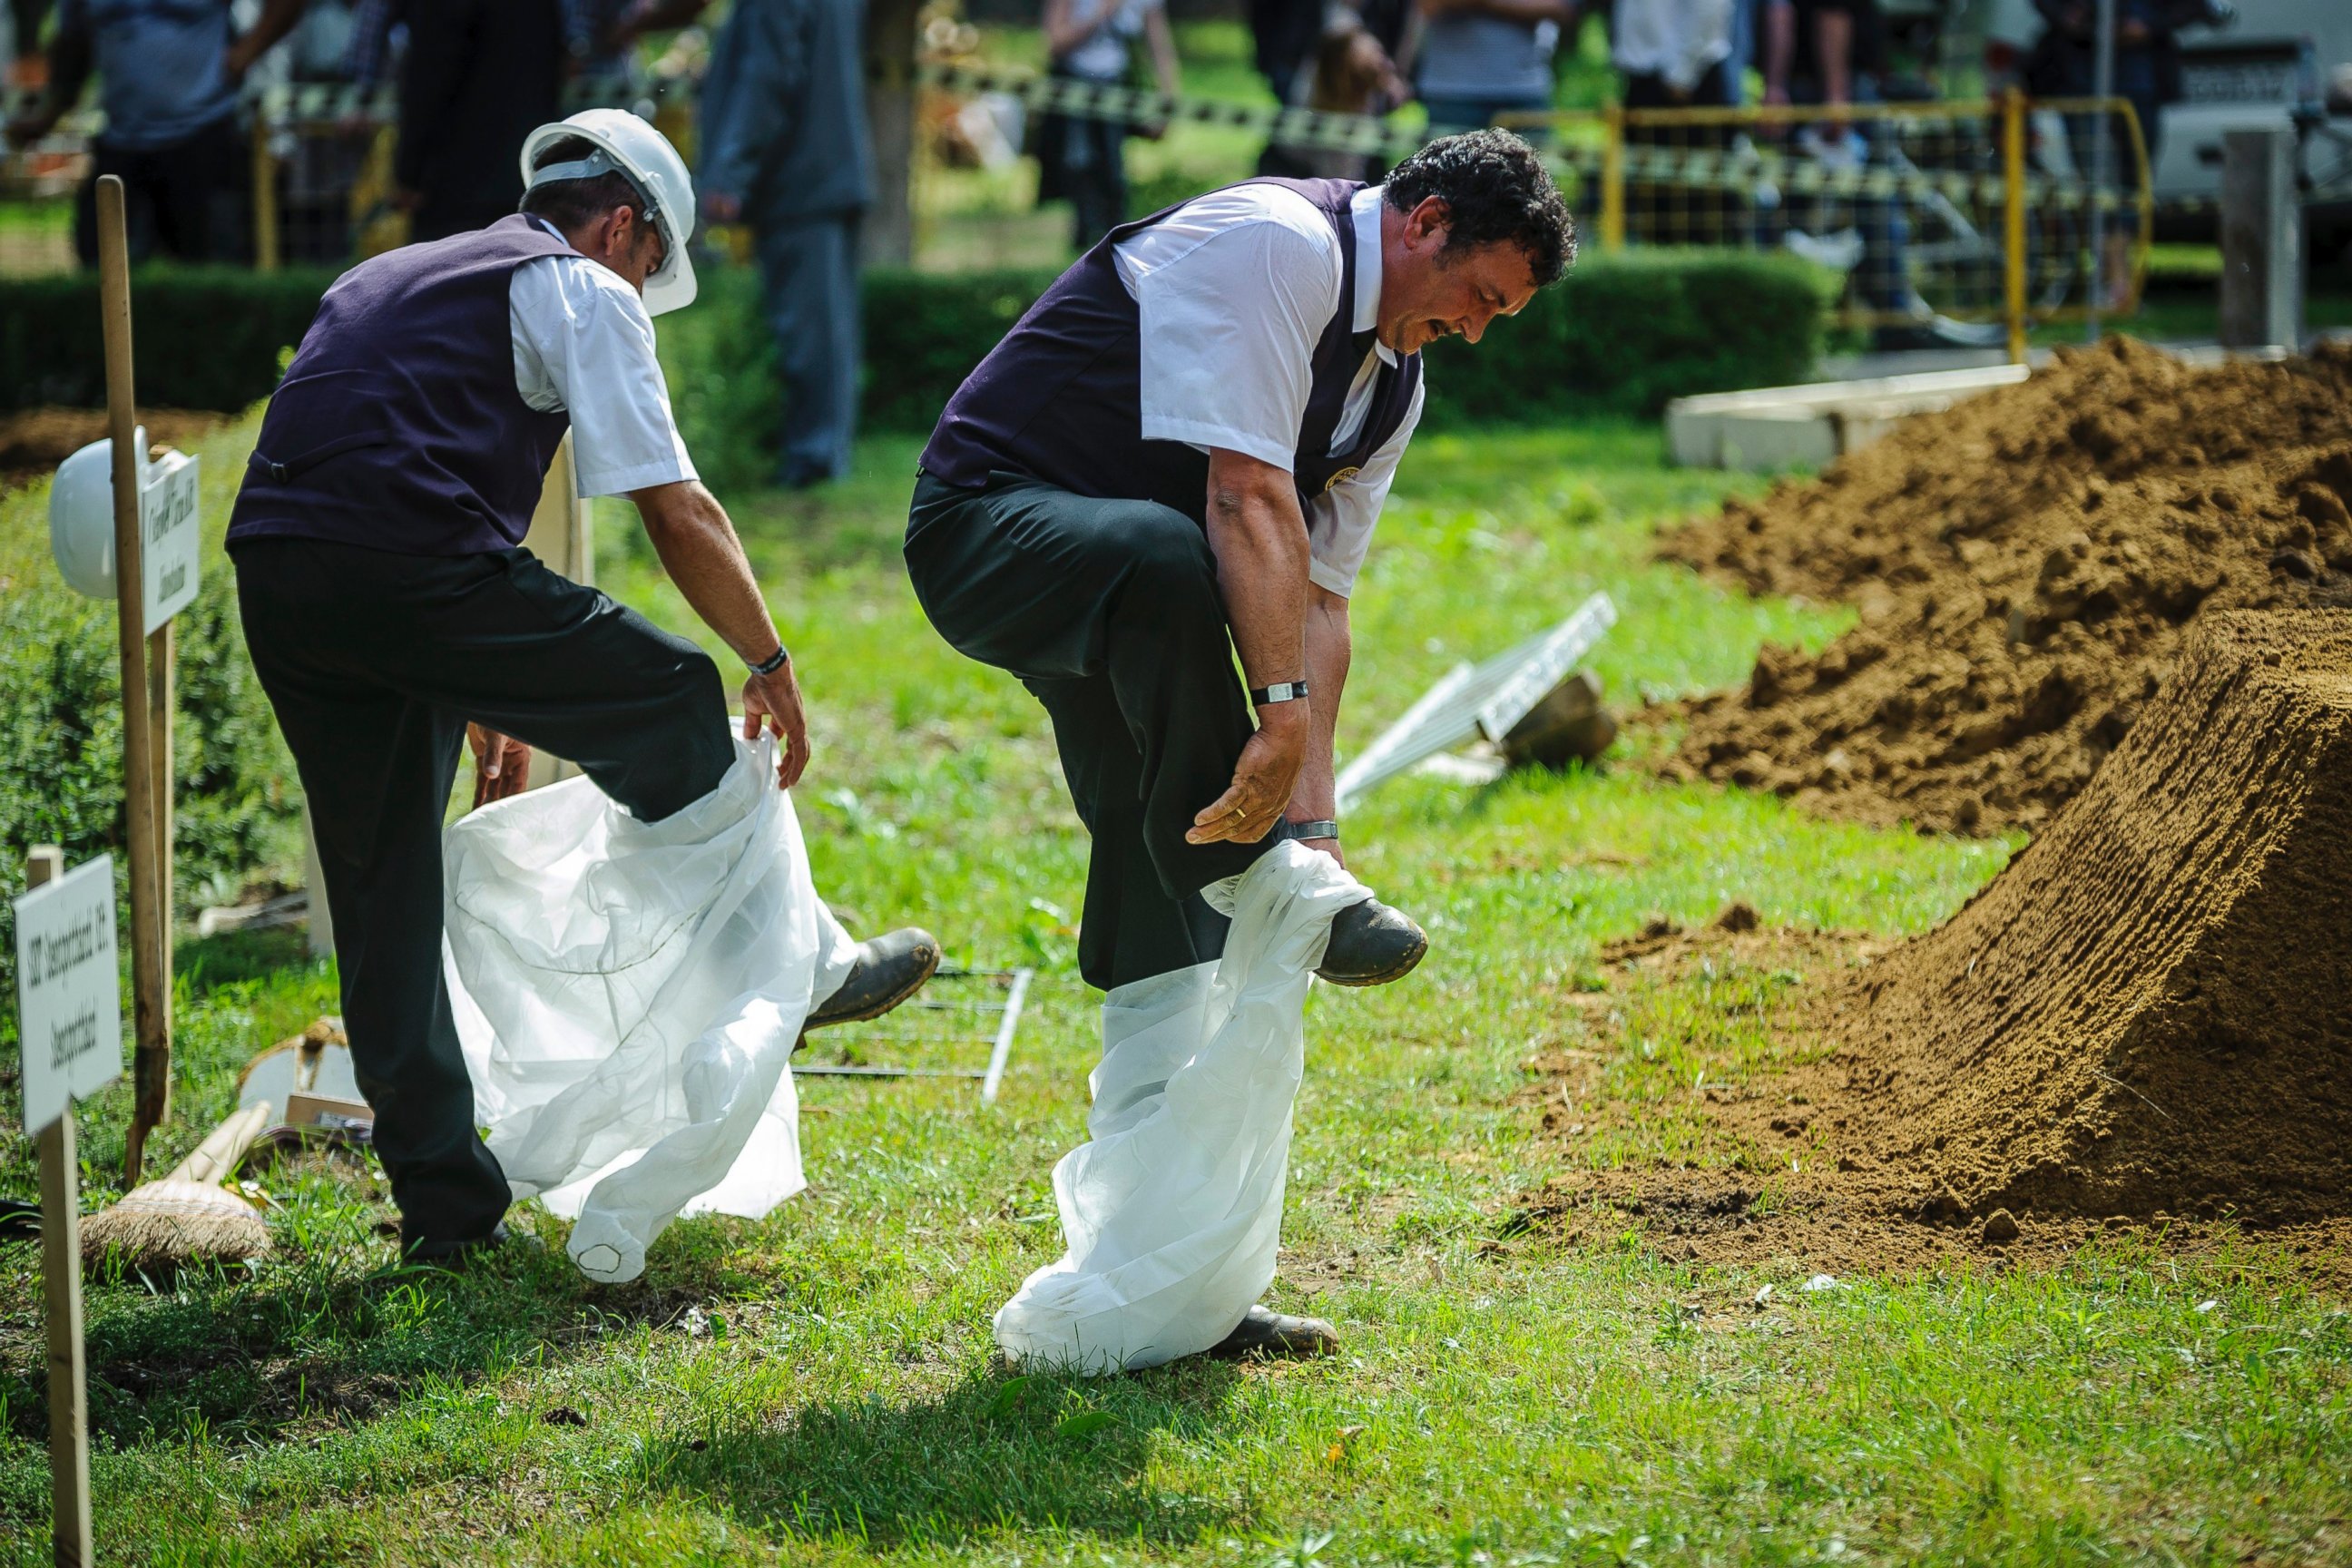 PHOTO: Gravediggers take off their disposable overalls during the first National Grave Digging competition at the public cemetery of Debrecen, Hungary, June 3, 2016.